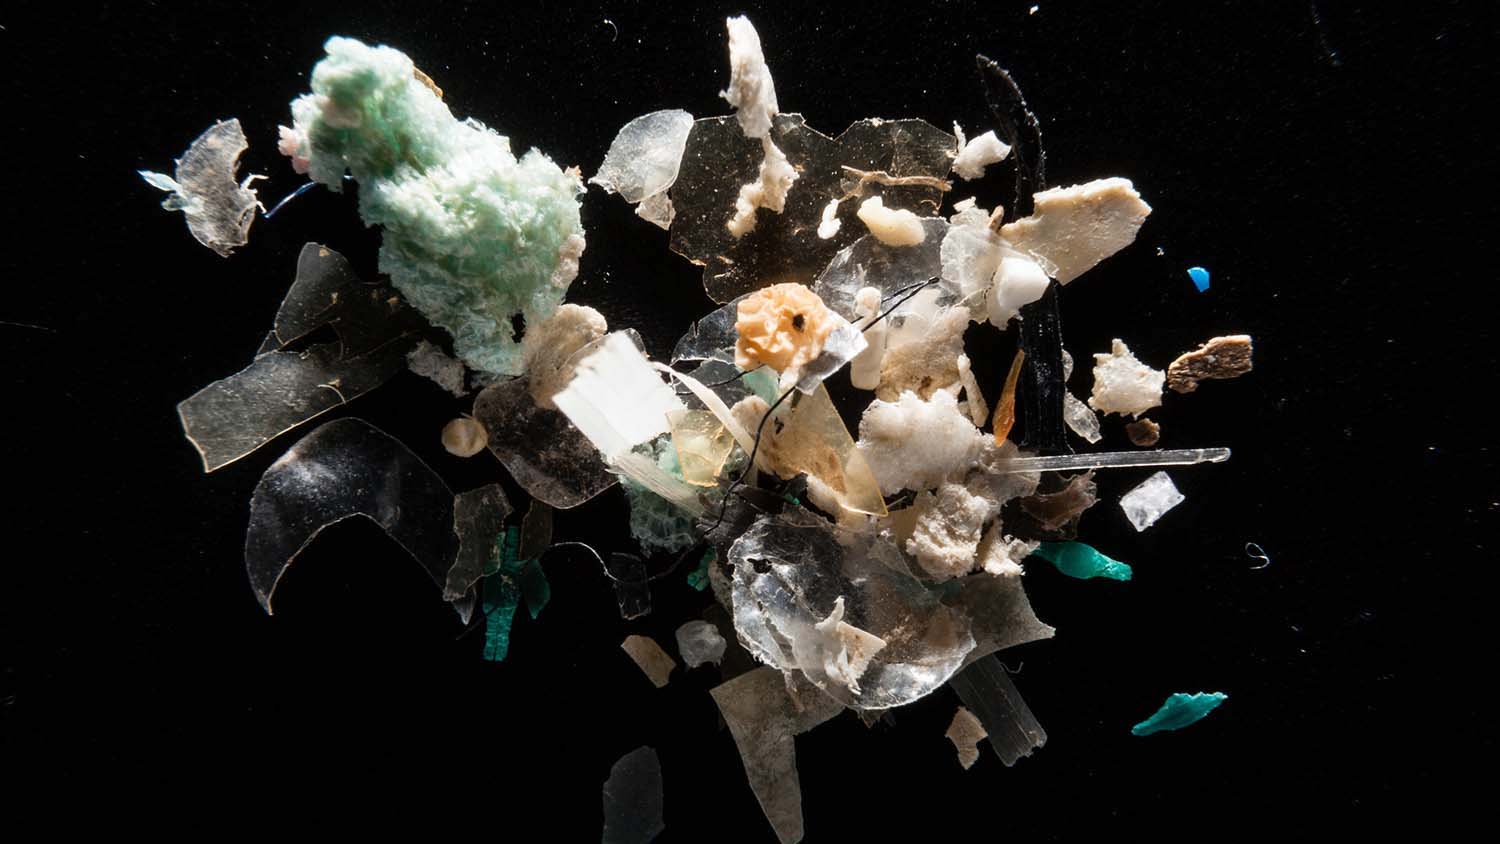 A collection of microplastics